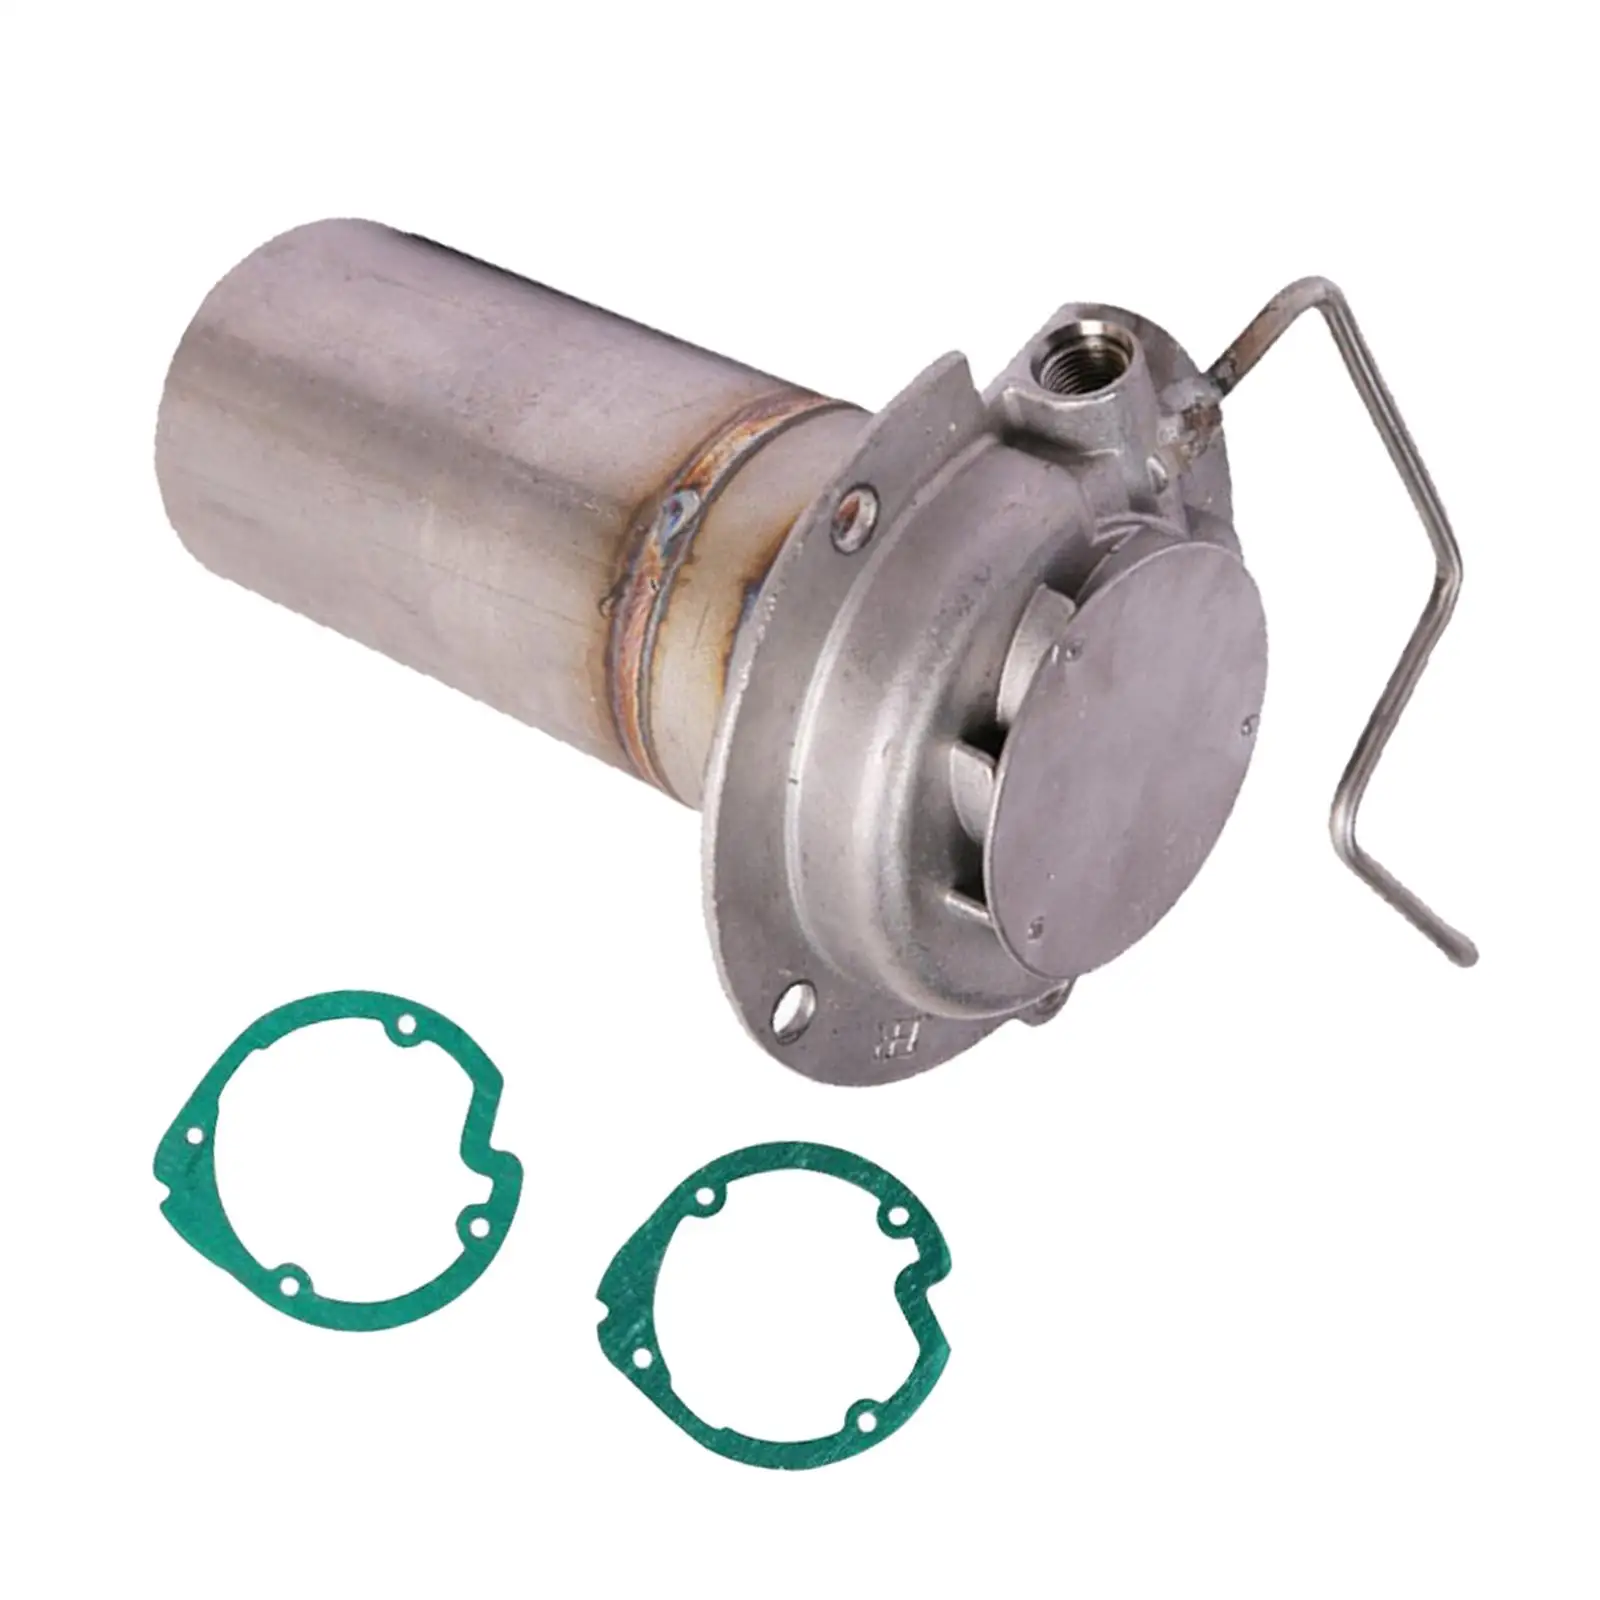 Automotive Combustion Chamber Stainless Steel for Parking Heater Fast